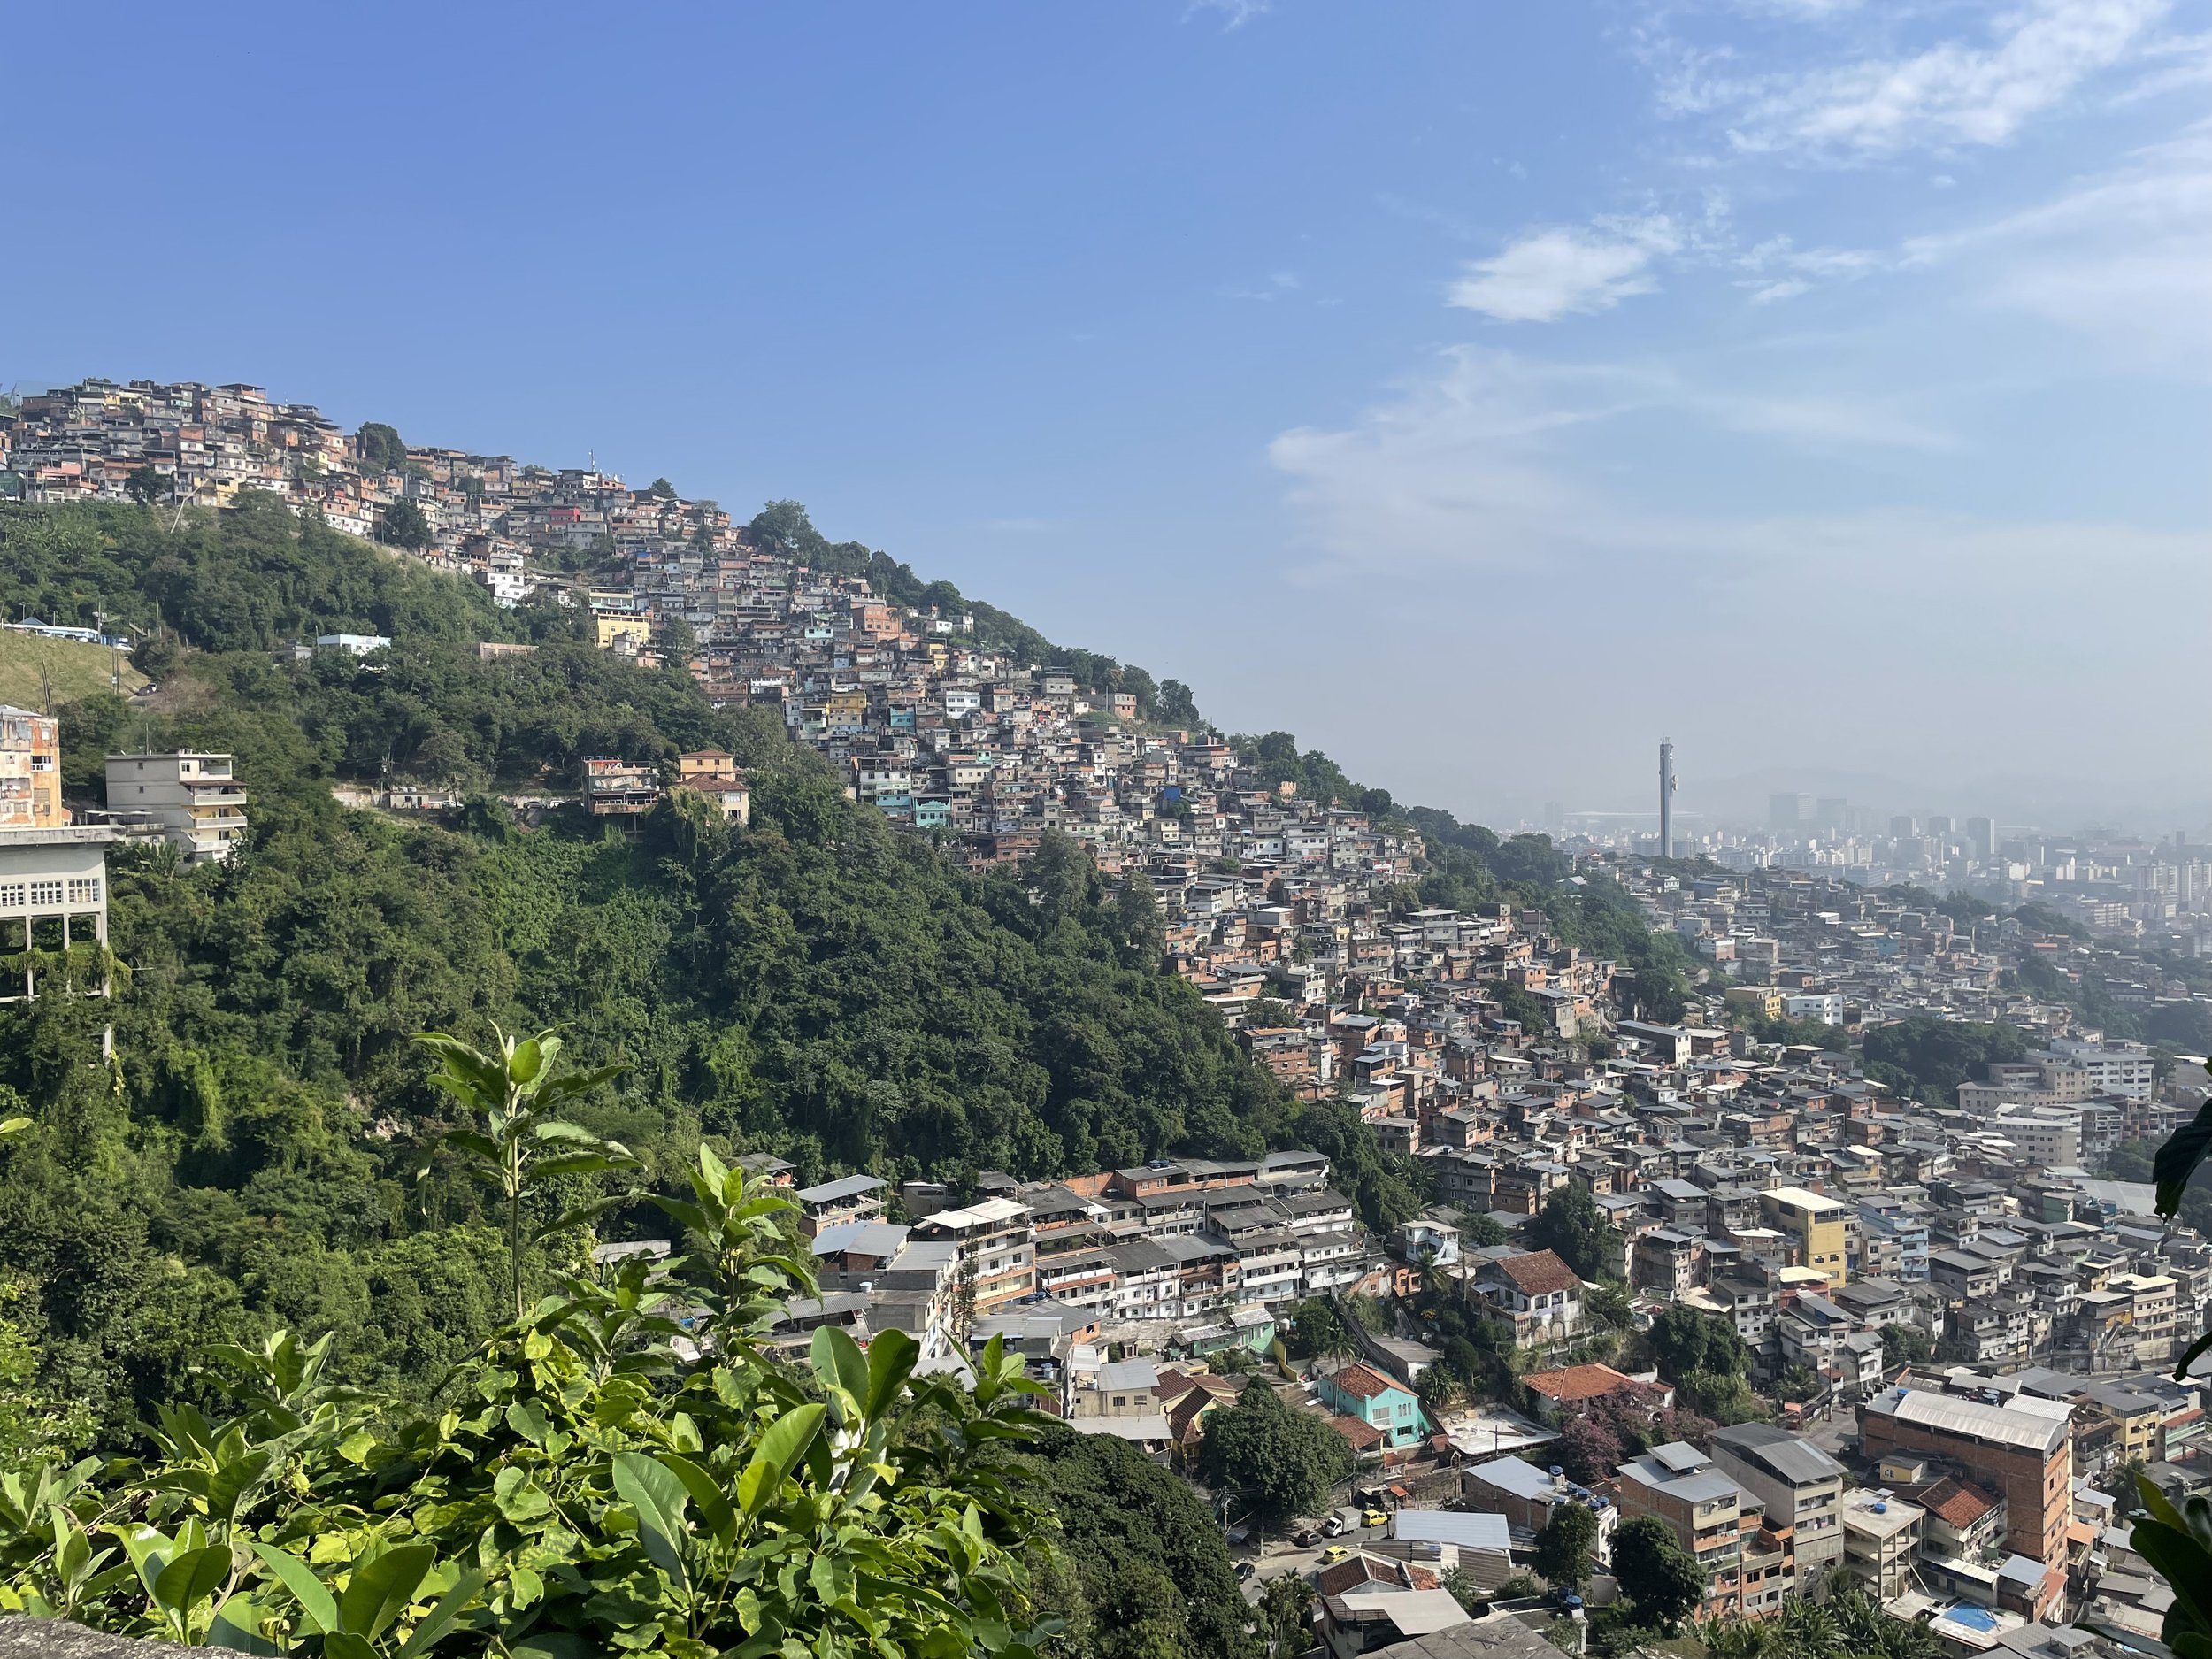  A view of a favela 